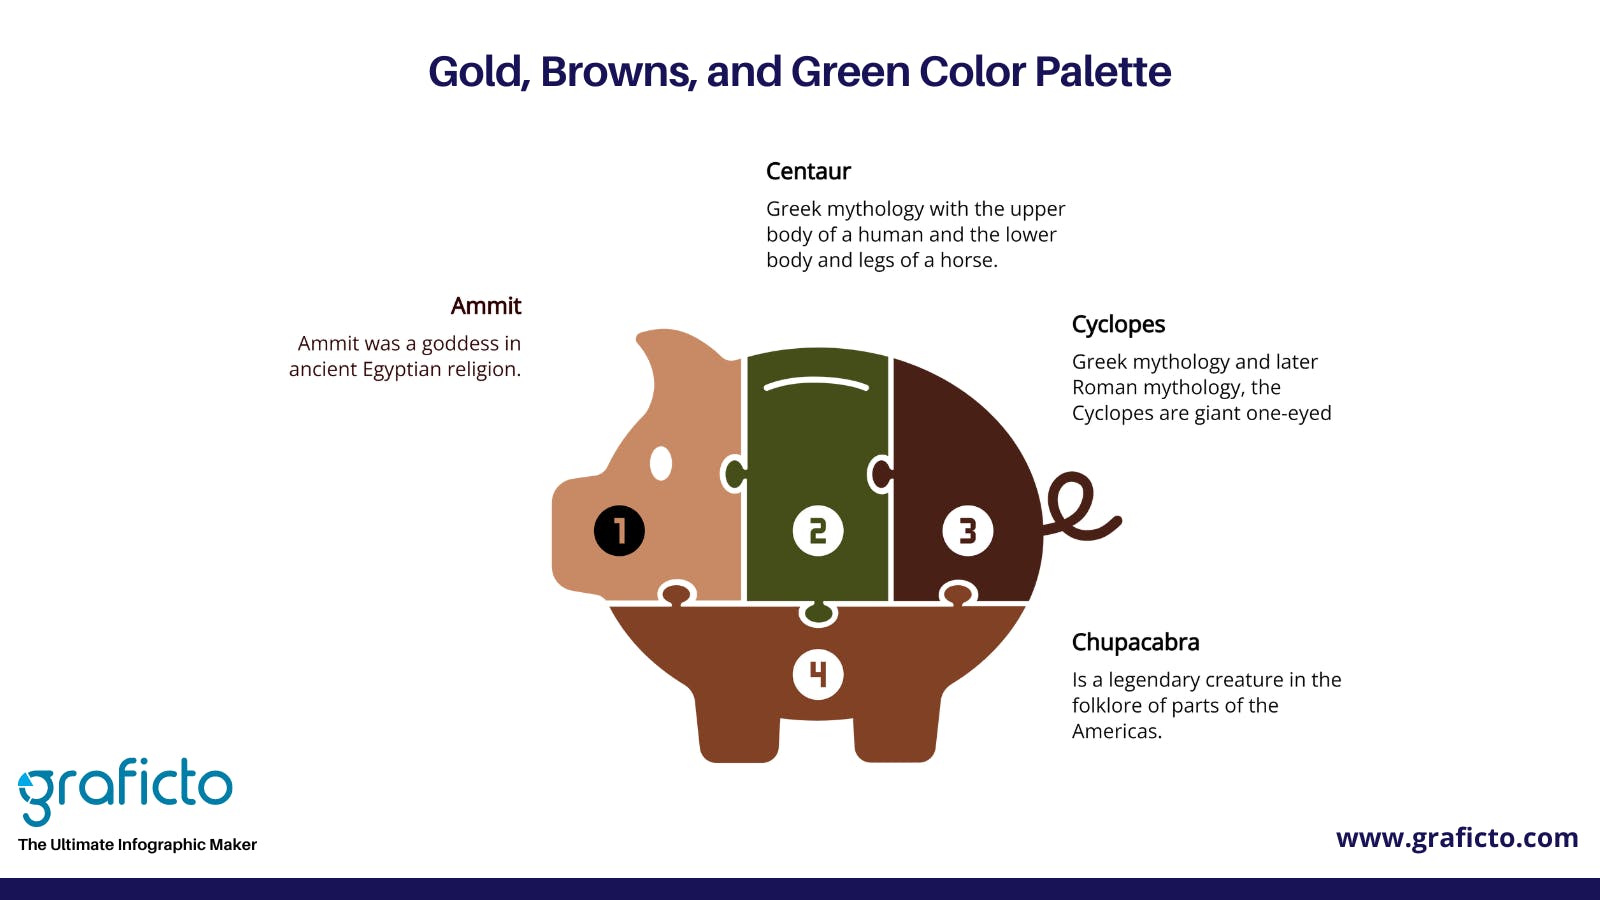 Gold, Browns, and Green graficto Christmas Color Palettes